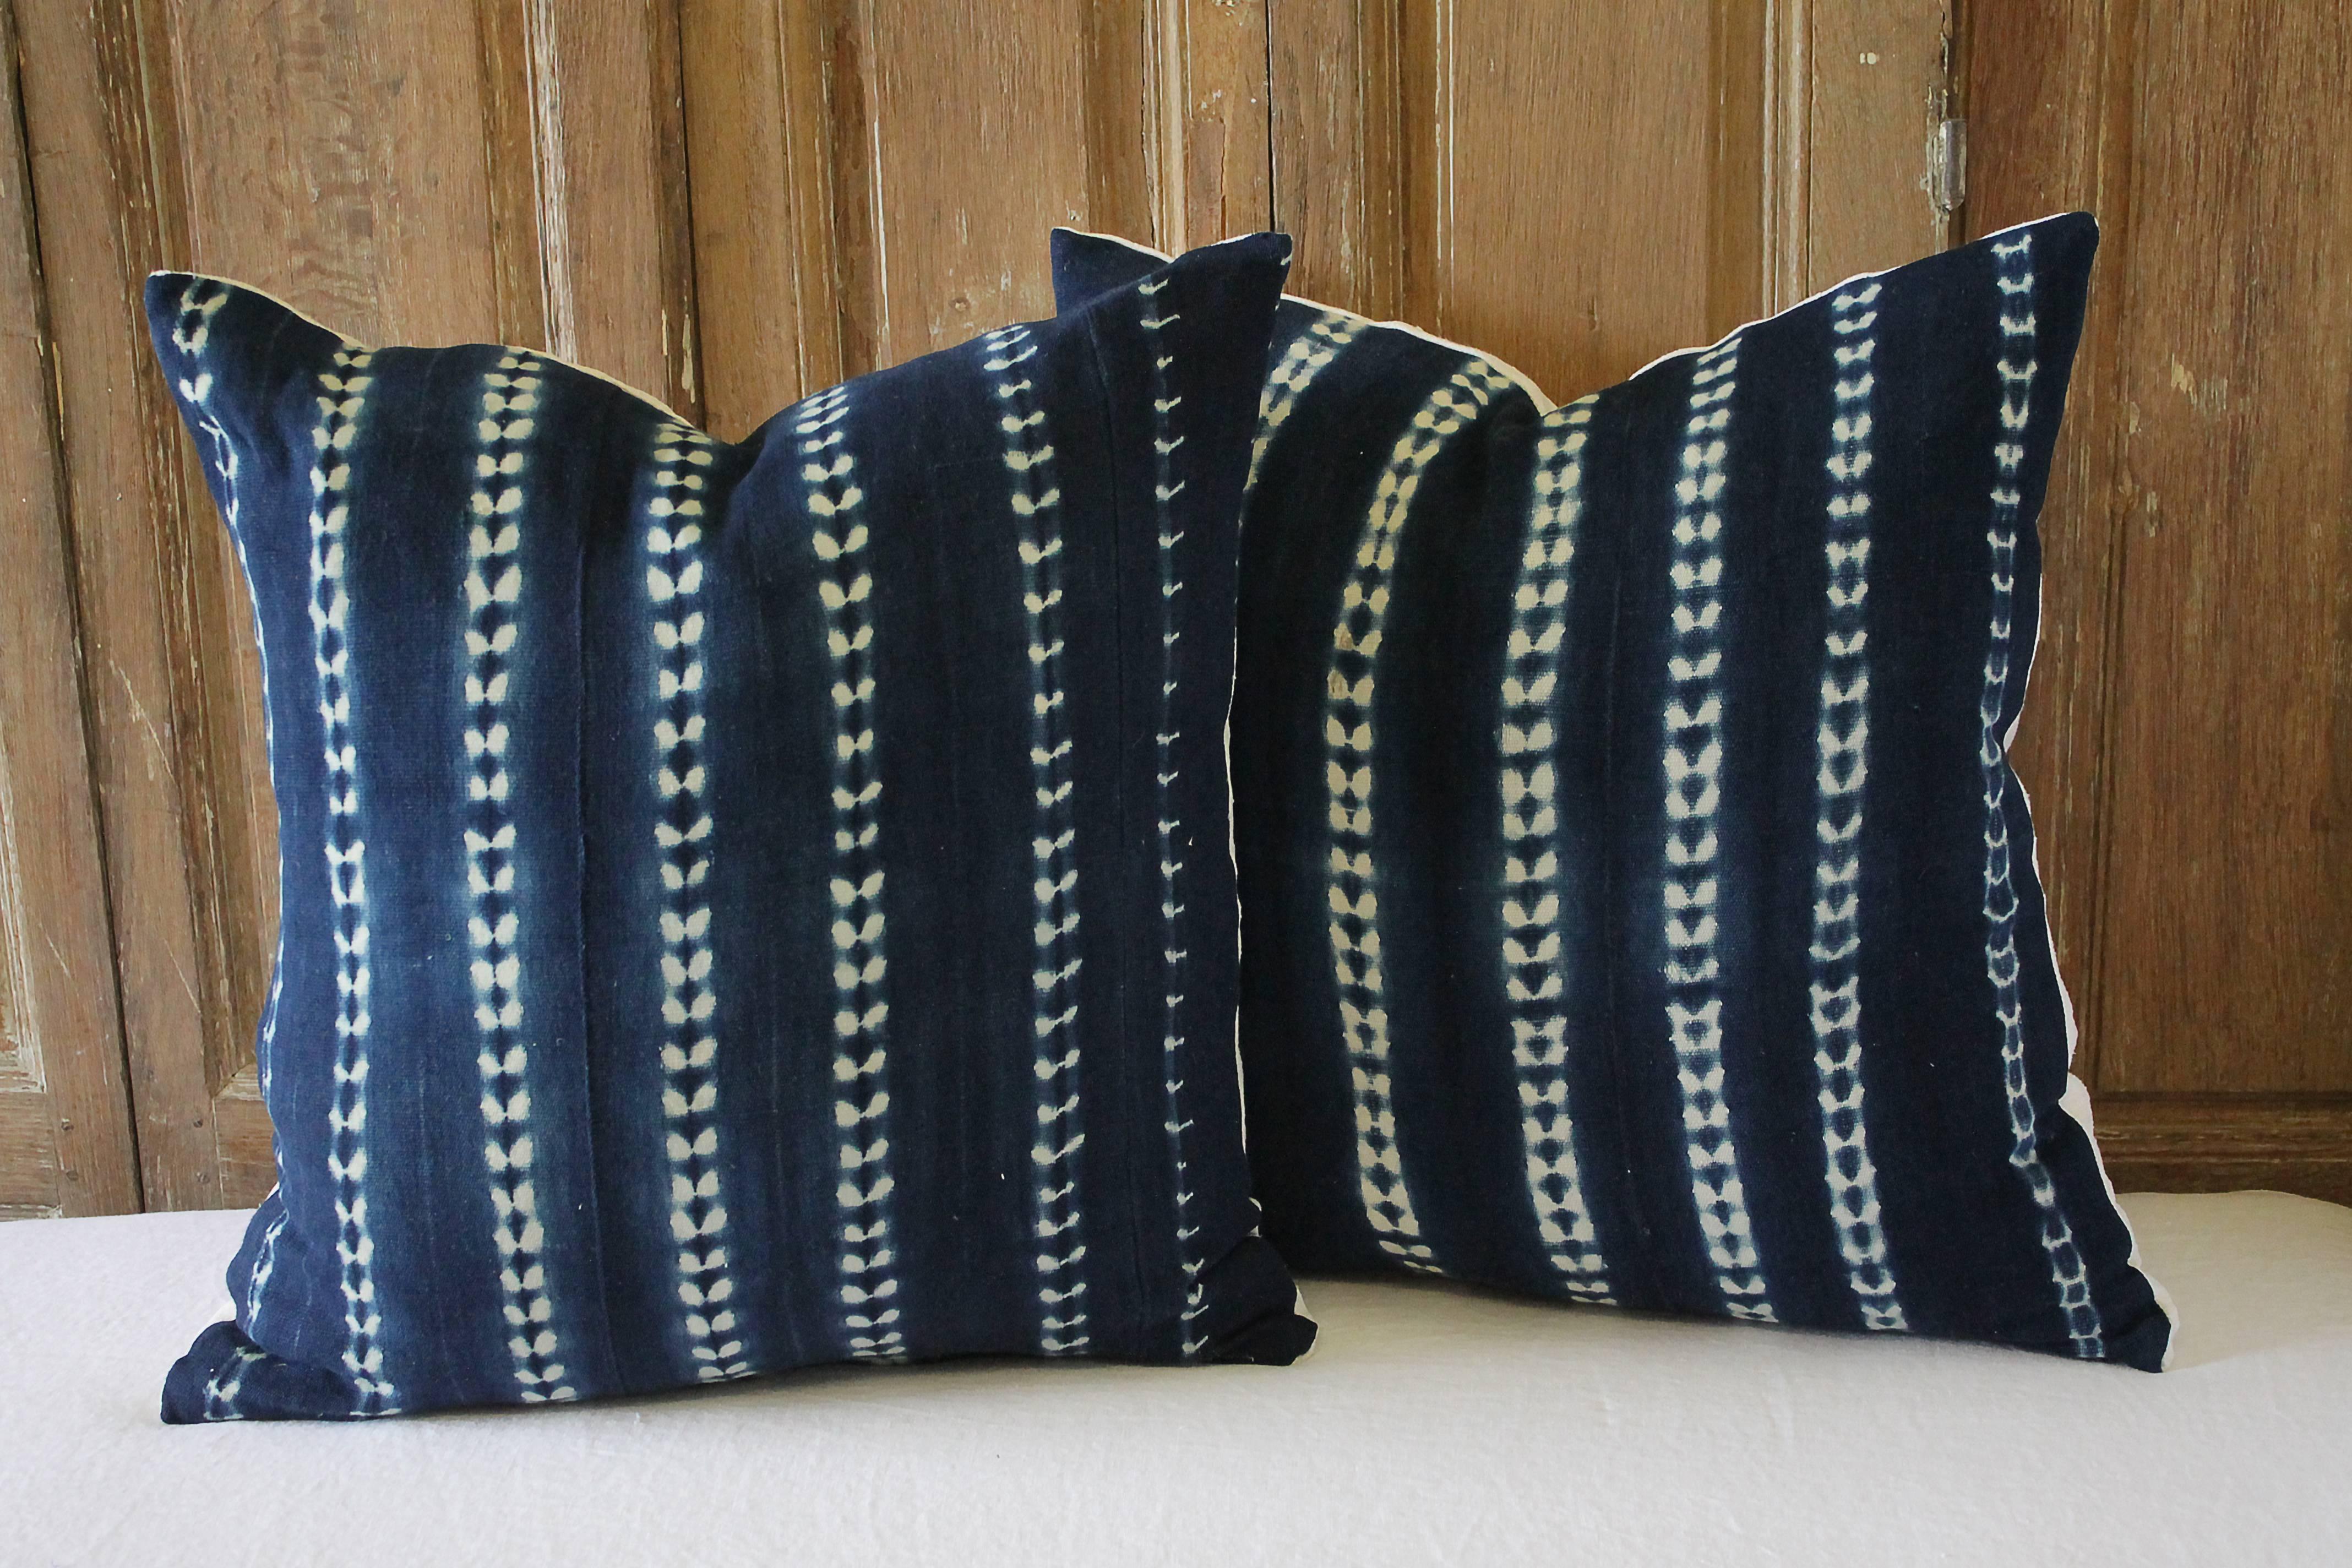 Pair of antique indigo blue Batik accent pillows
Custom-made by Full Bloom Cottage, the fronts of the pillows are in an antique Batik fabric, very soft and nubby, the backside are finished in a thick natural French linen, with hidden zipper closure.